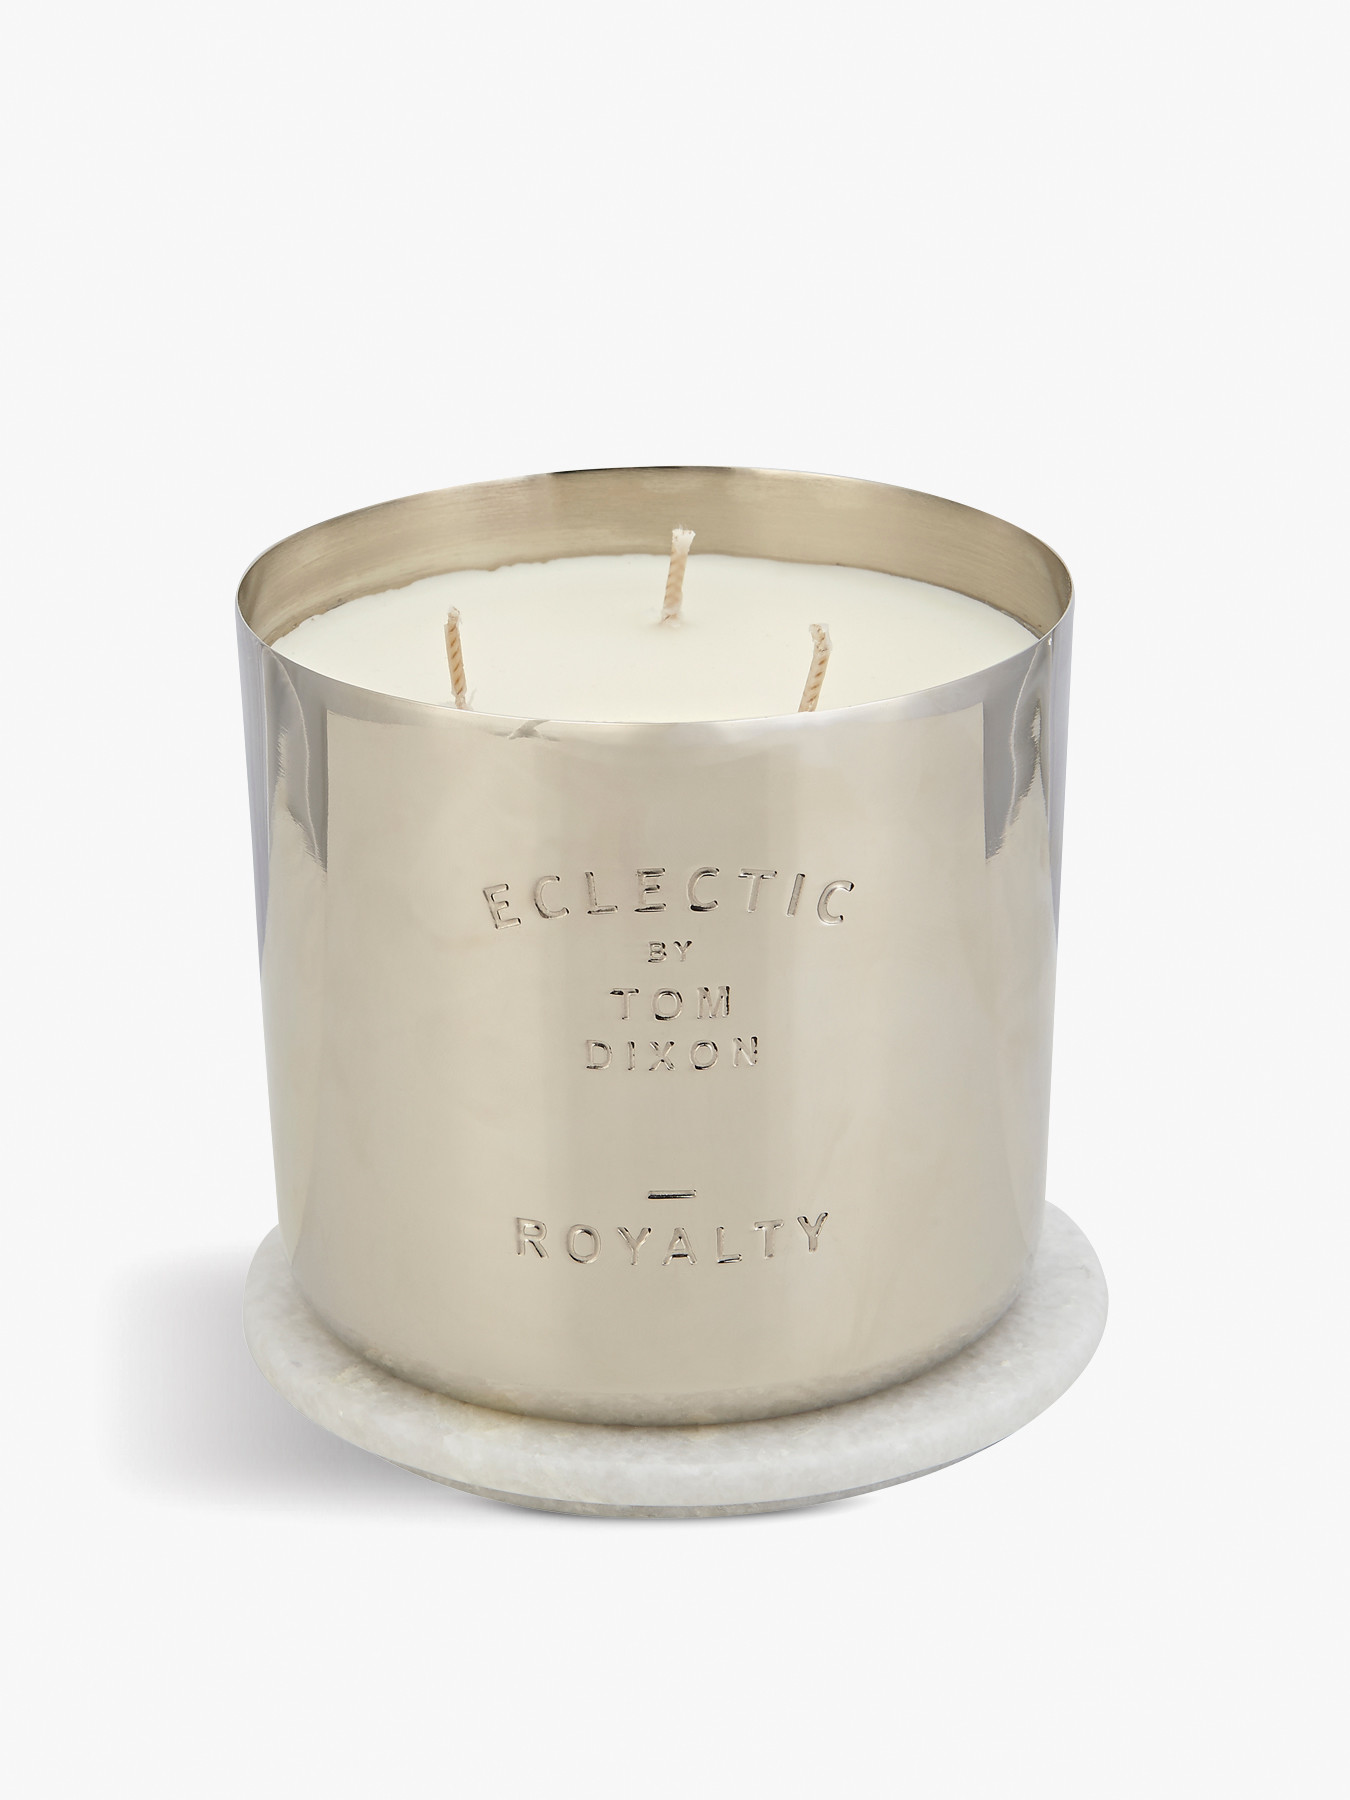 Tom Dixon Eclectic Royalty Candle Large | Fenwick